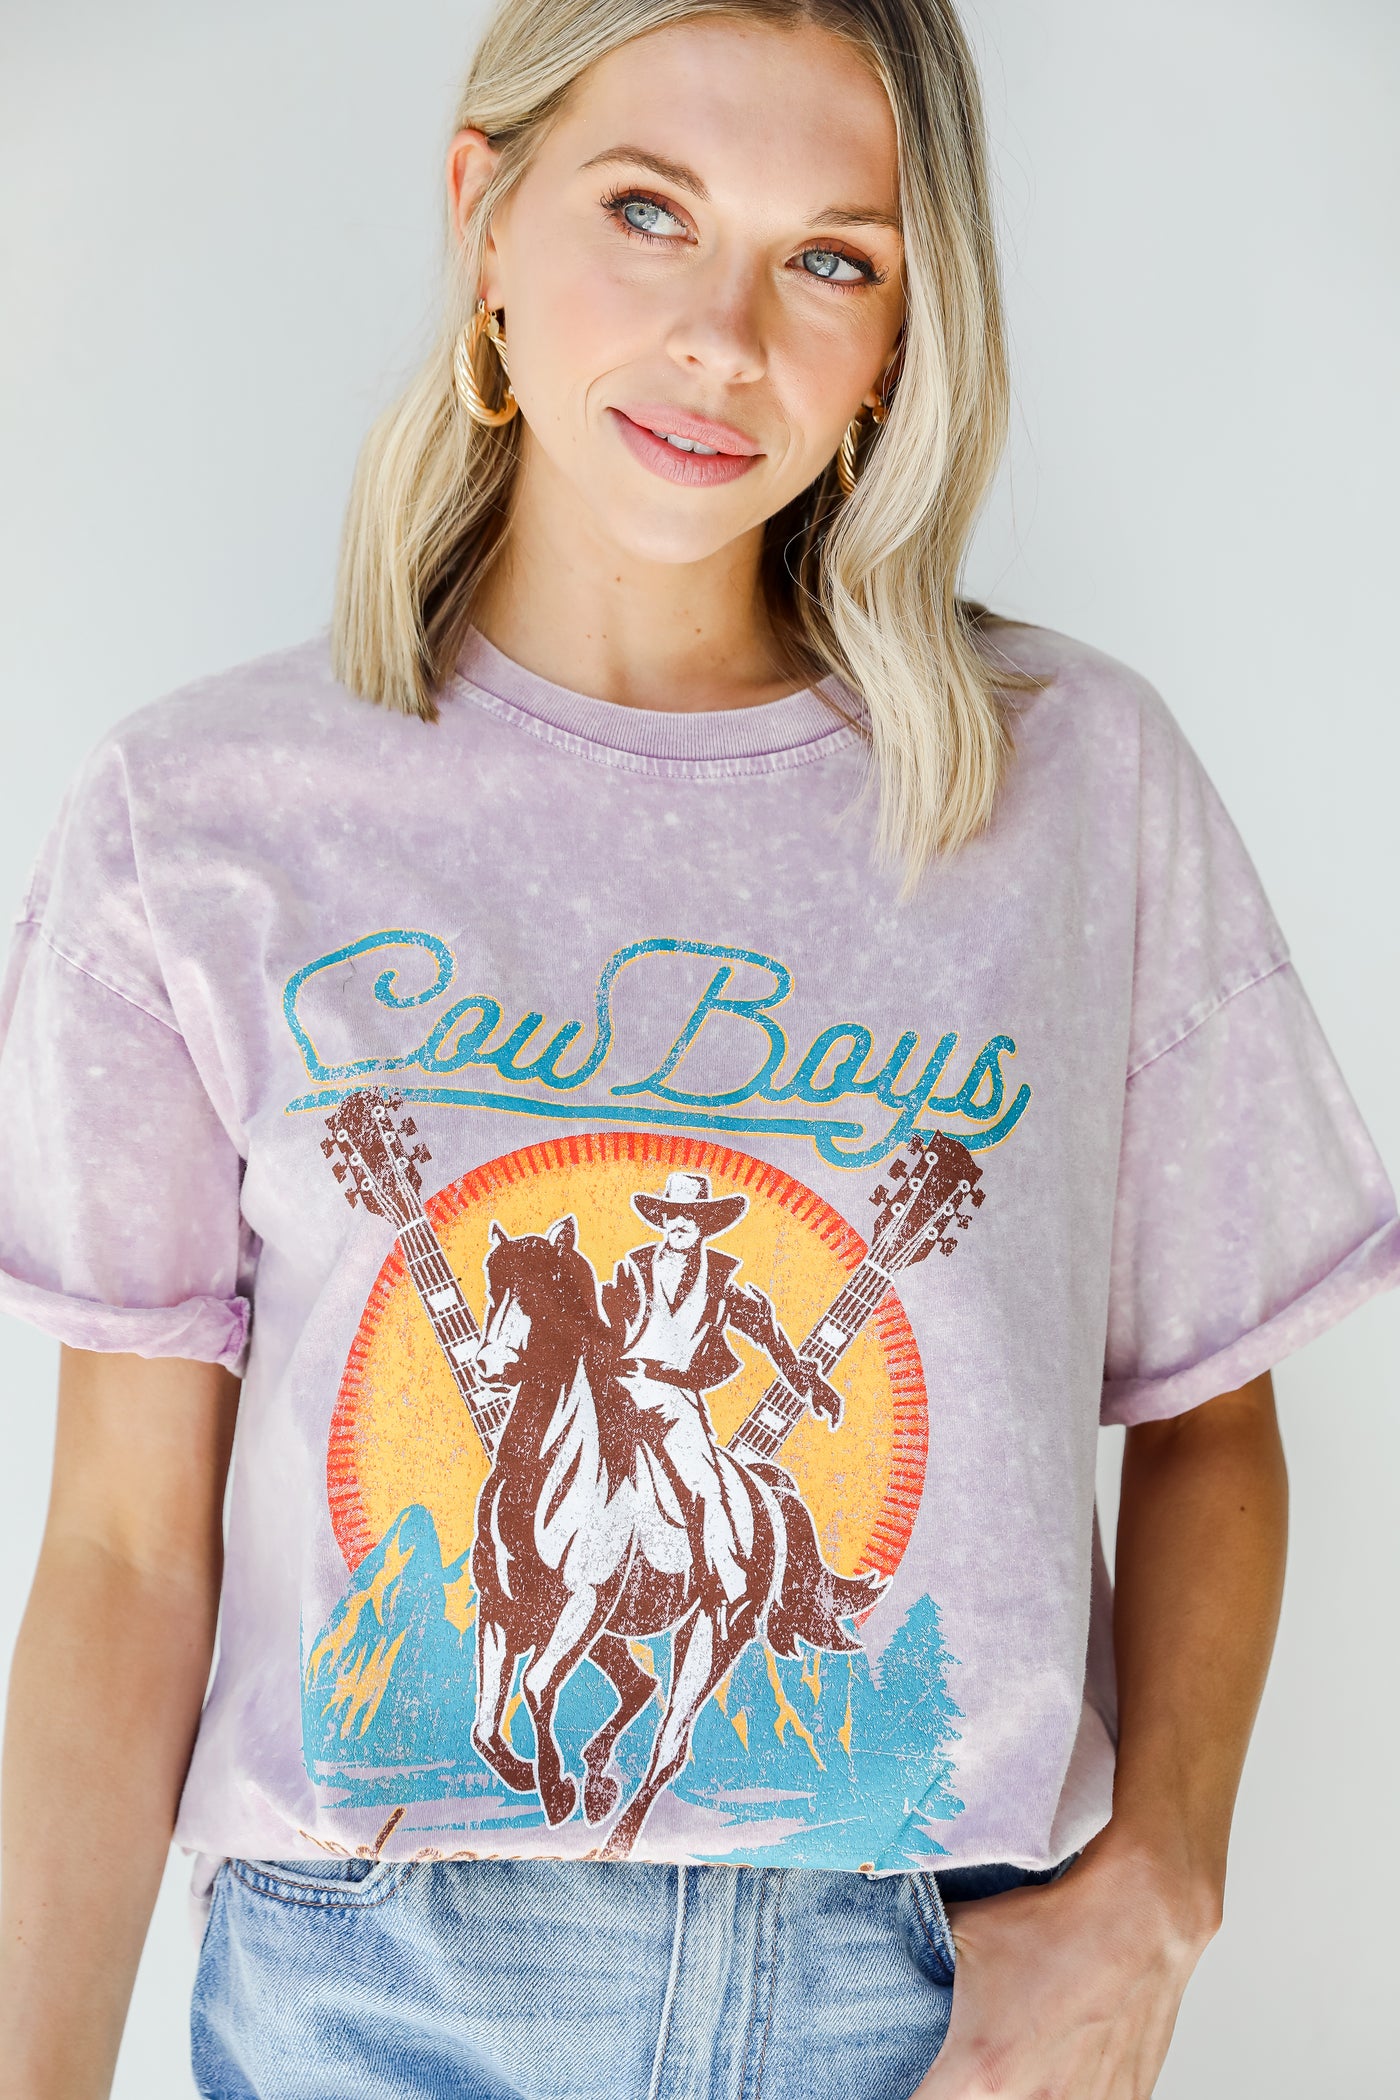 Cowboys And Country Music Acid Washed Tee front view